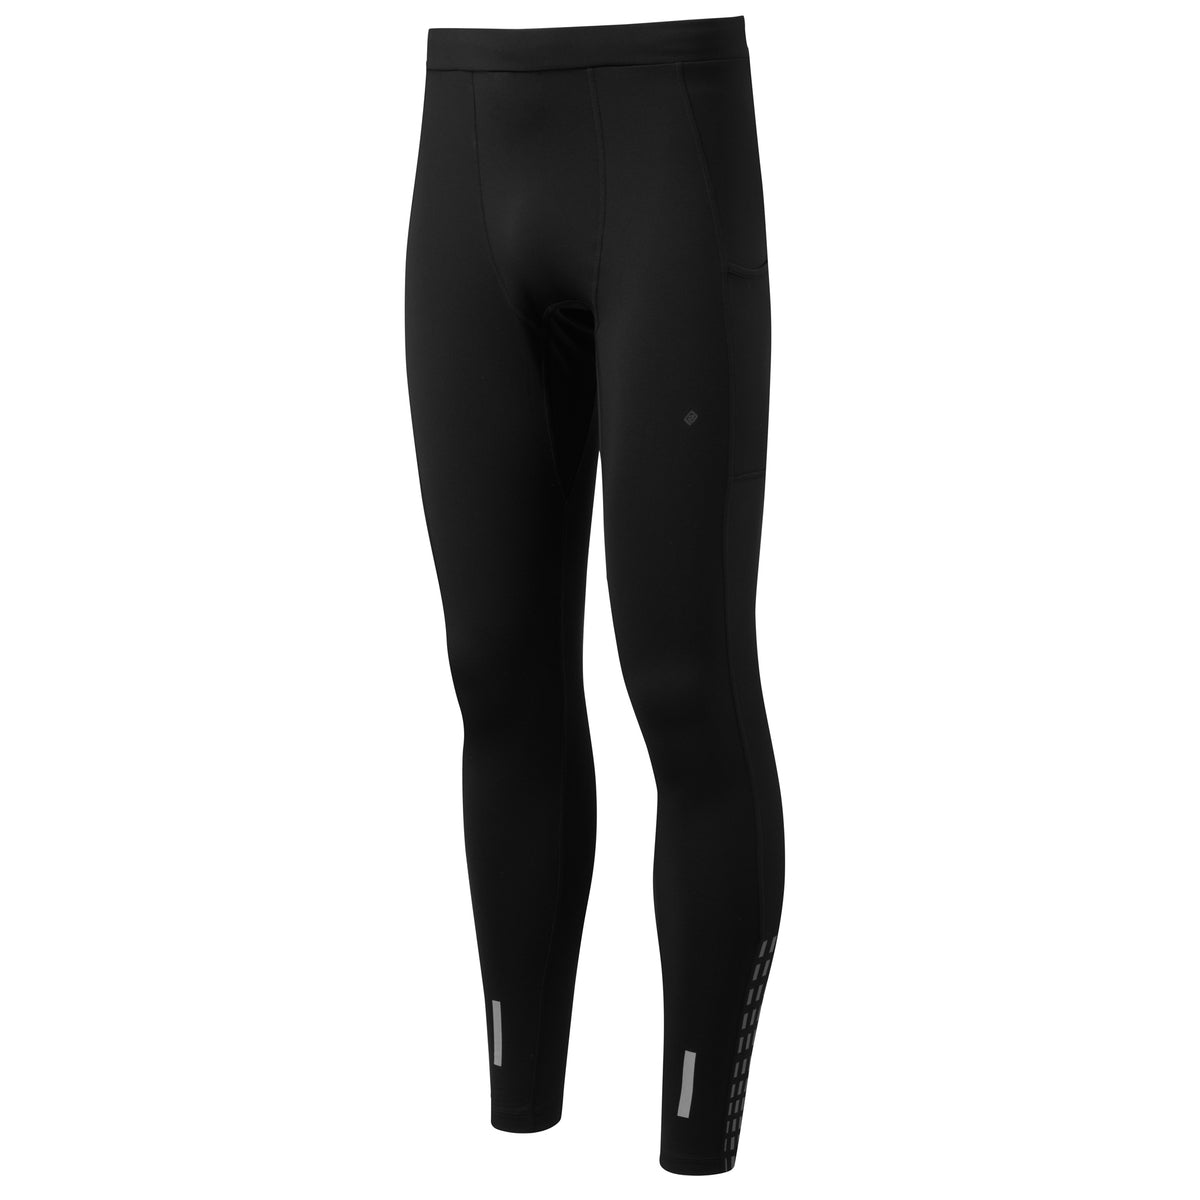 Ronhill Tech Revive Stretchy & Breathable Running Tights Black/Hot